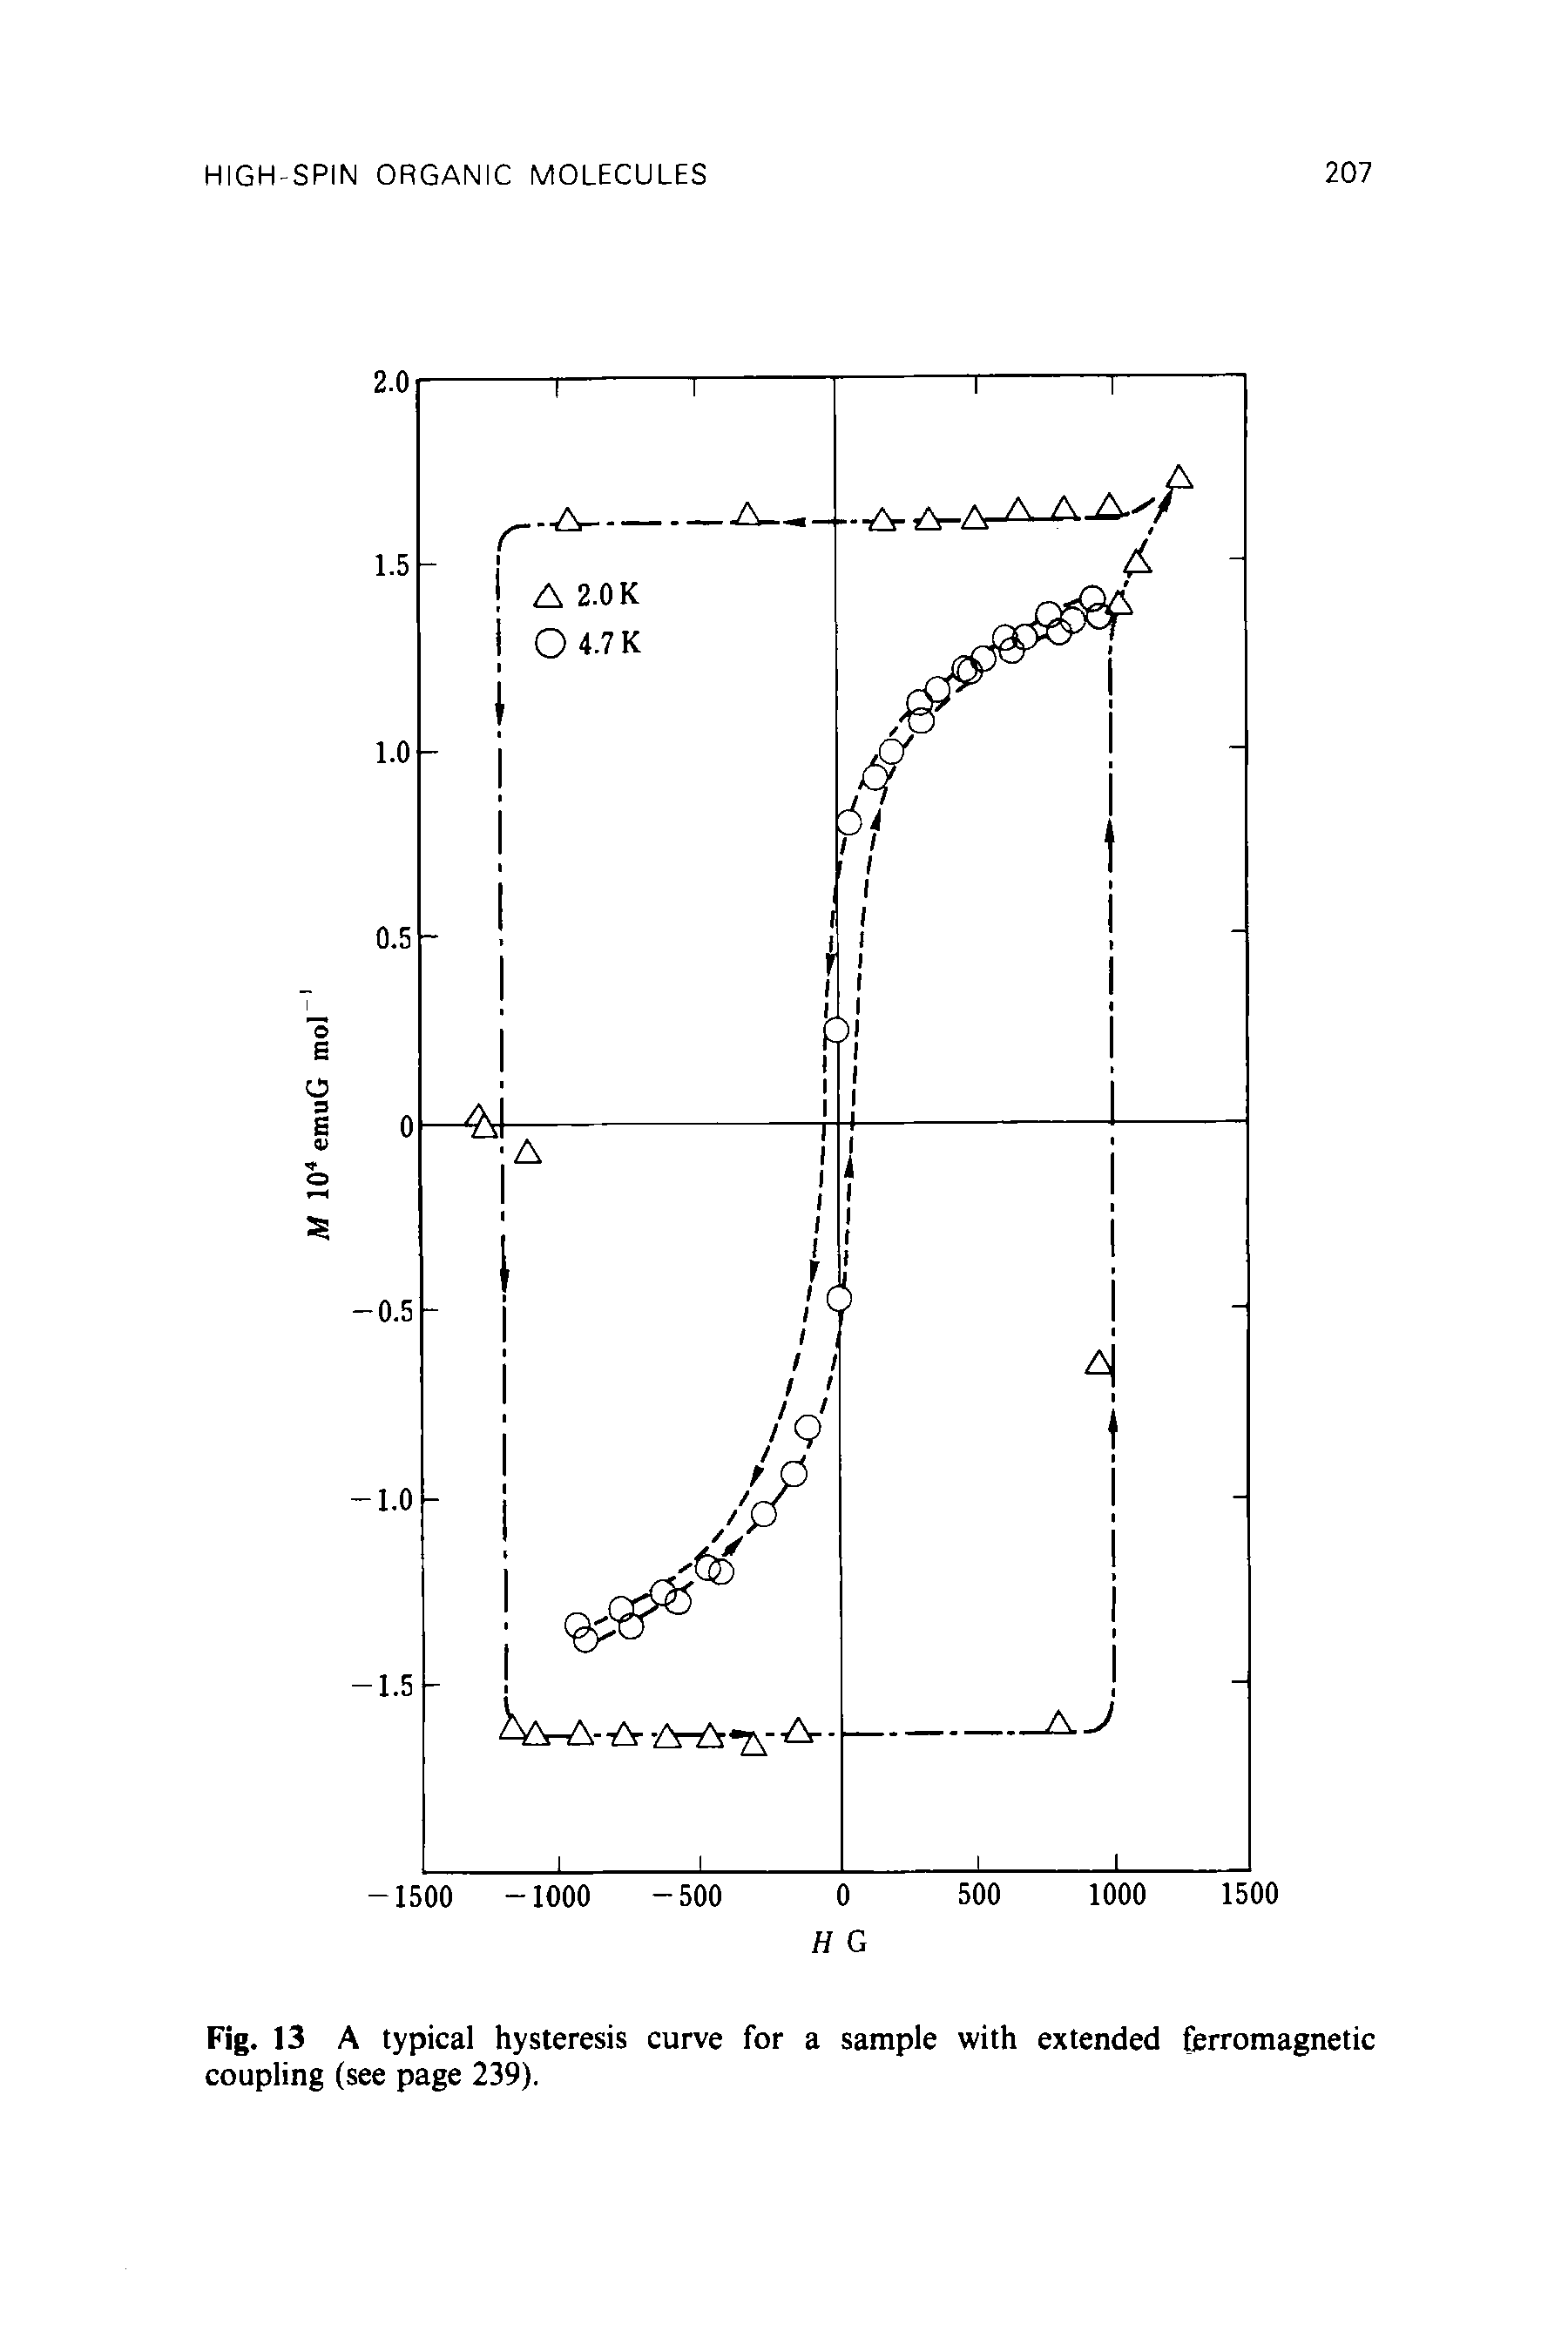 Fig. 13 A typical hysteresis curve for a sample with extended ferromagnetic coupling (see page 239).